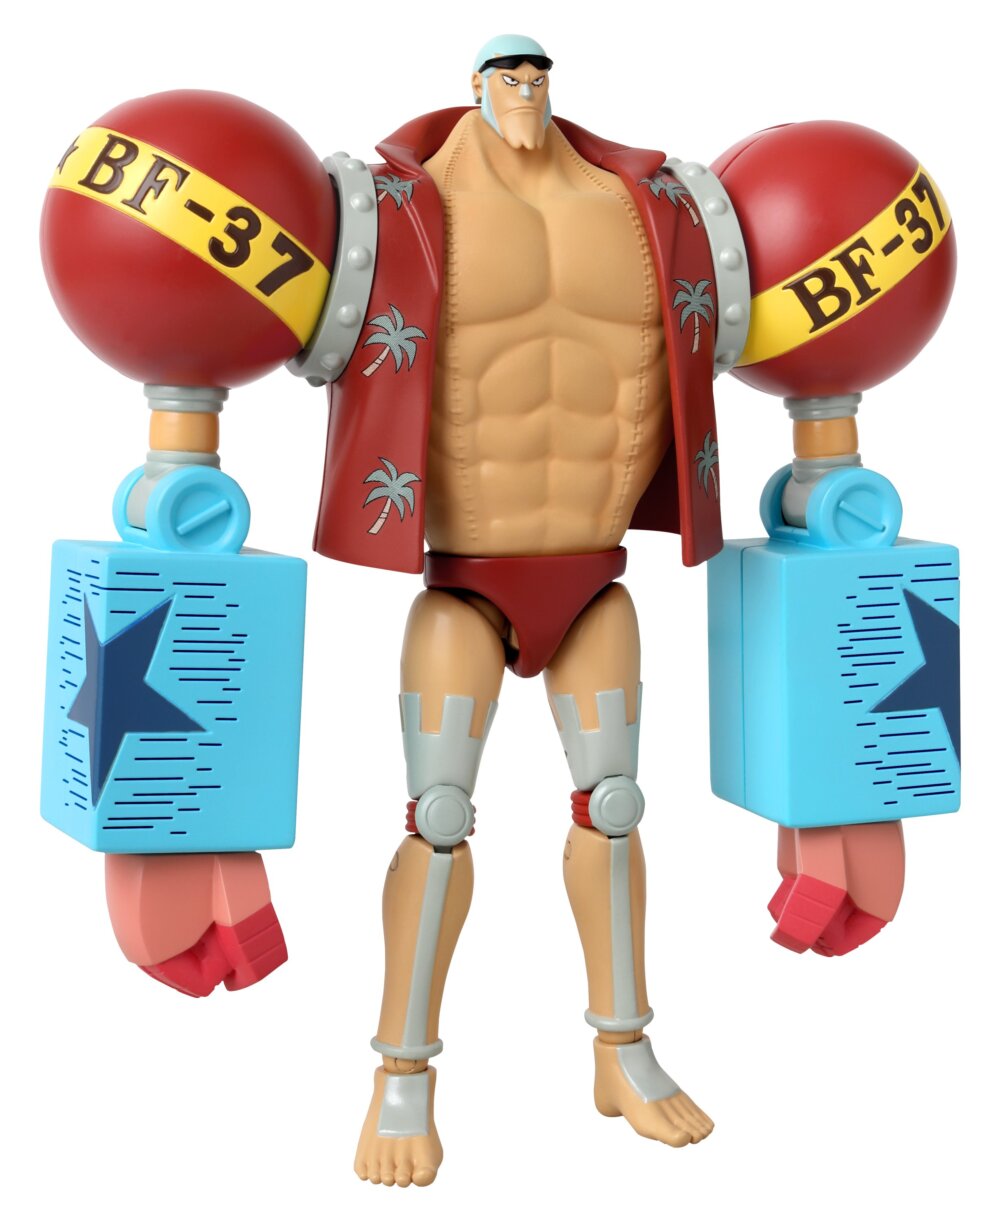 36968 | Bandai | Anime Heroes | One Piece | Franky  | Action Figure